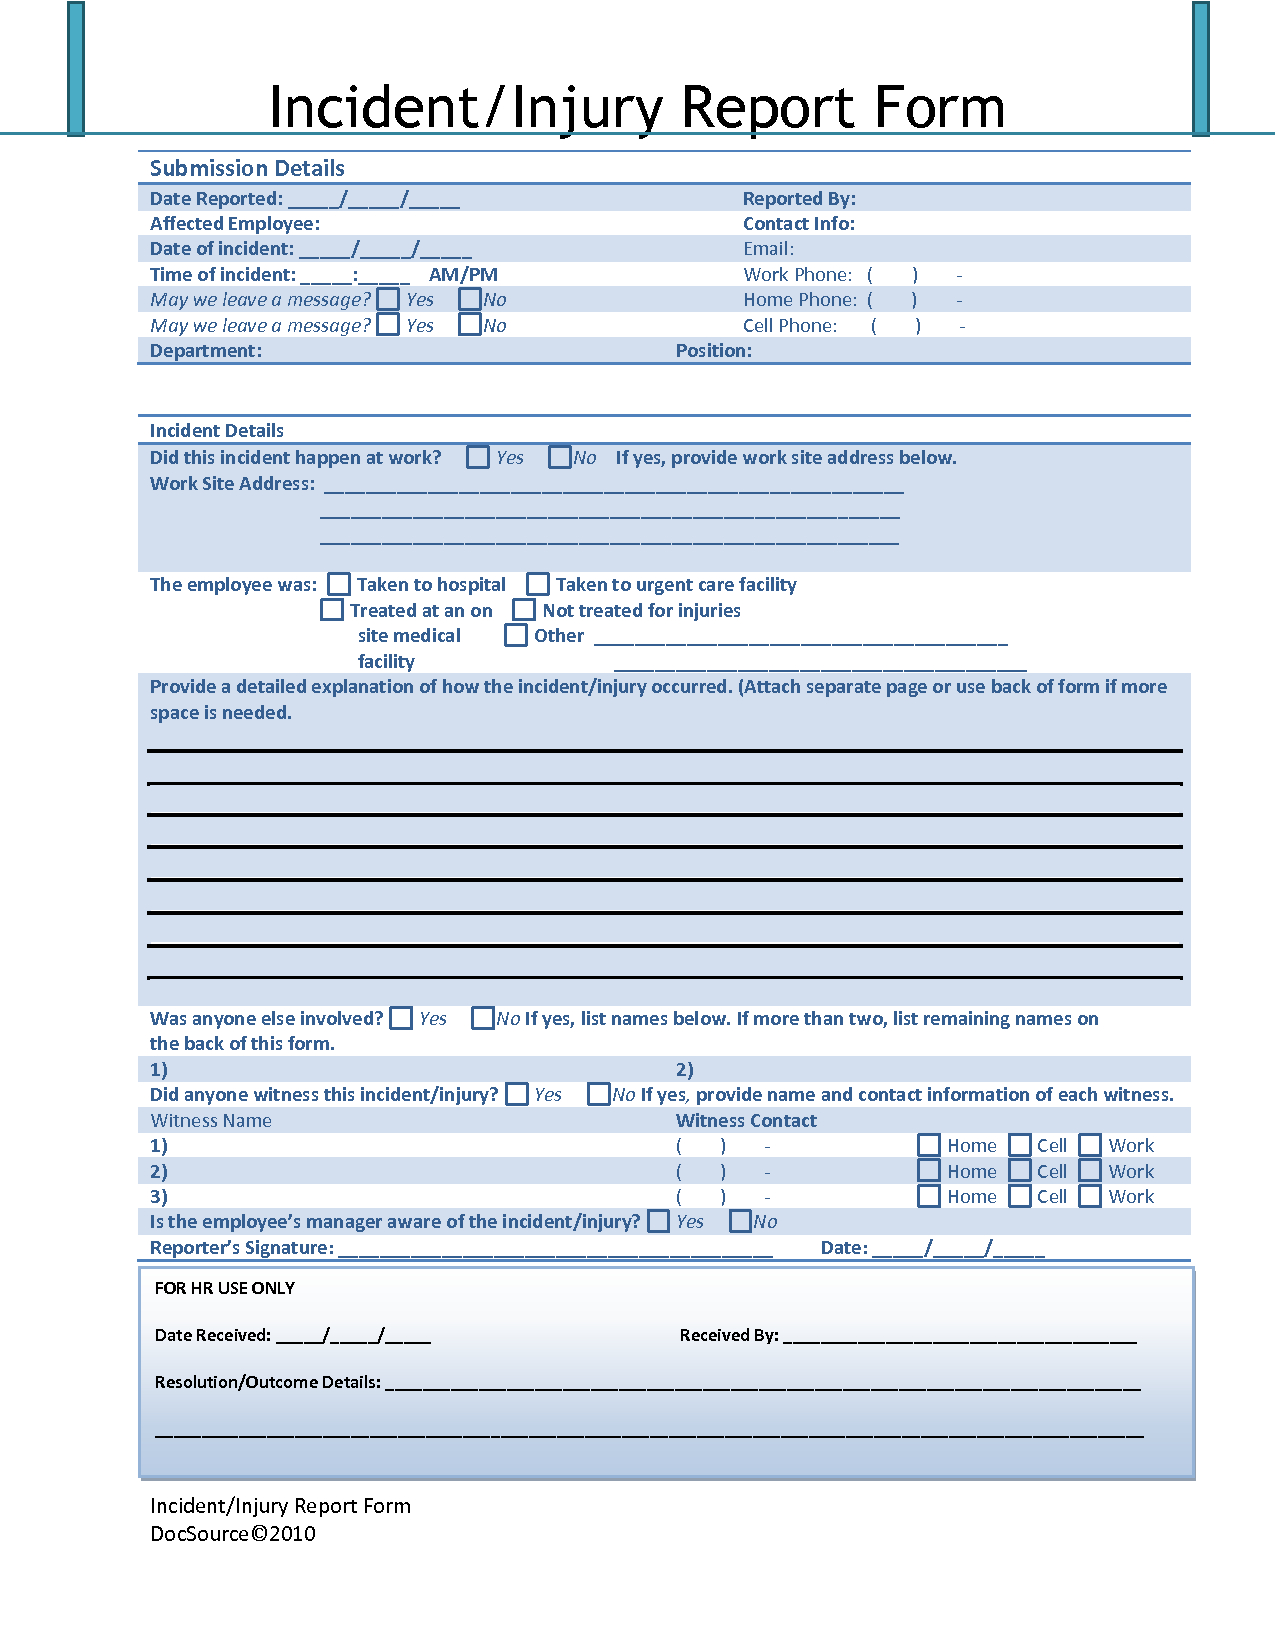 Effective Accident Injury Report Form Template With Blue With Injury Report Form Template